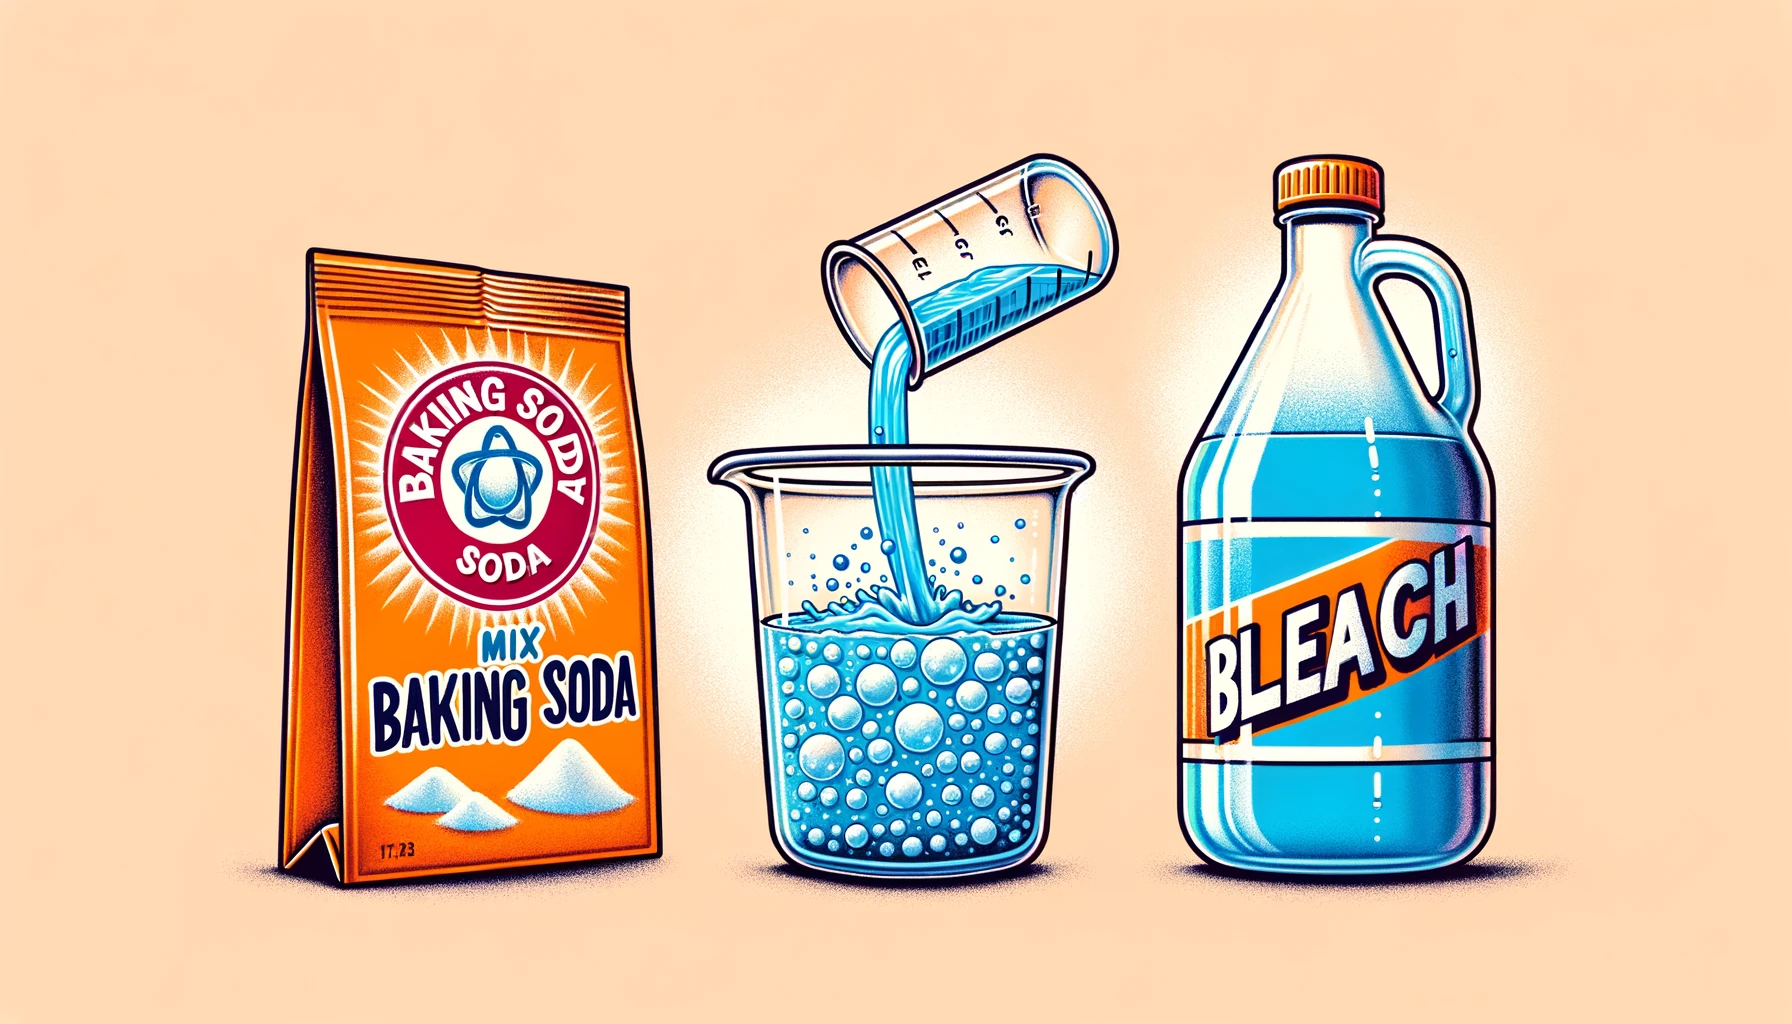 a packet of baking soda and a bottle of bleach being mixed in a beaker with a bubbling reaction.